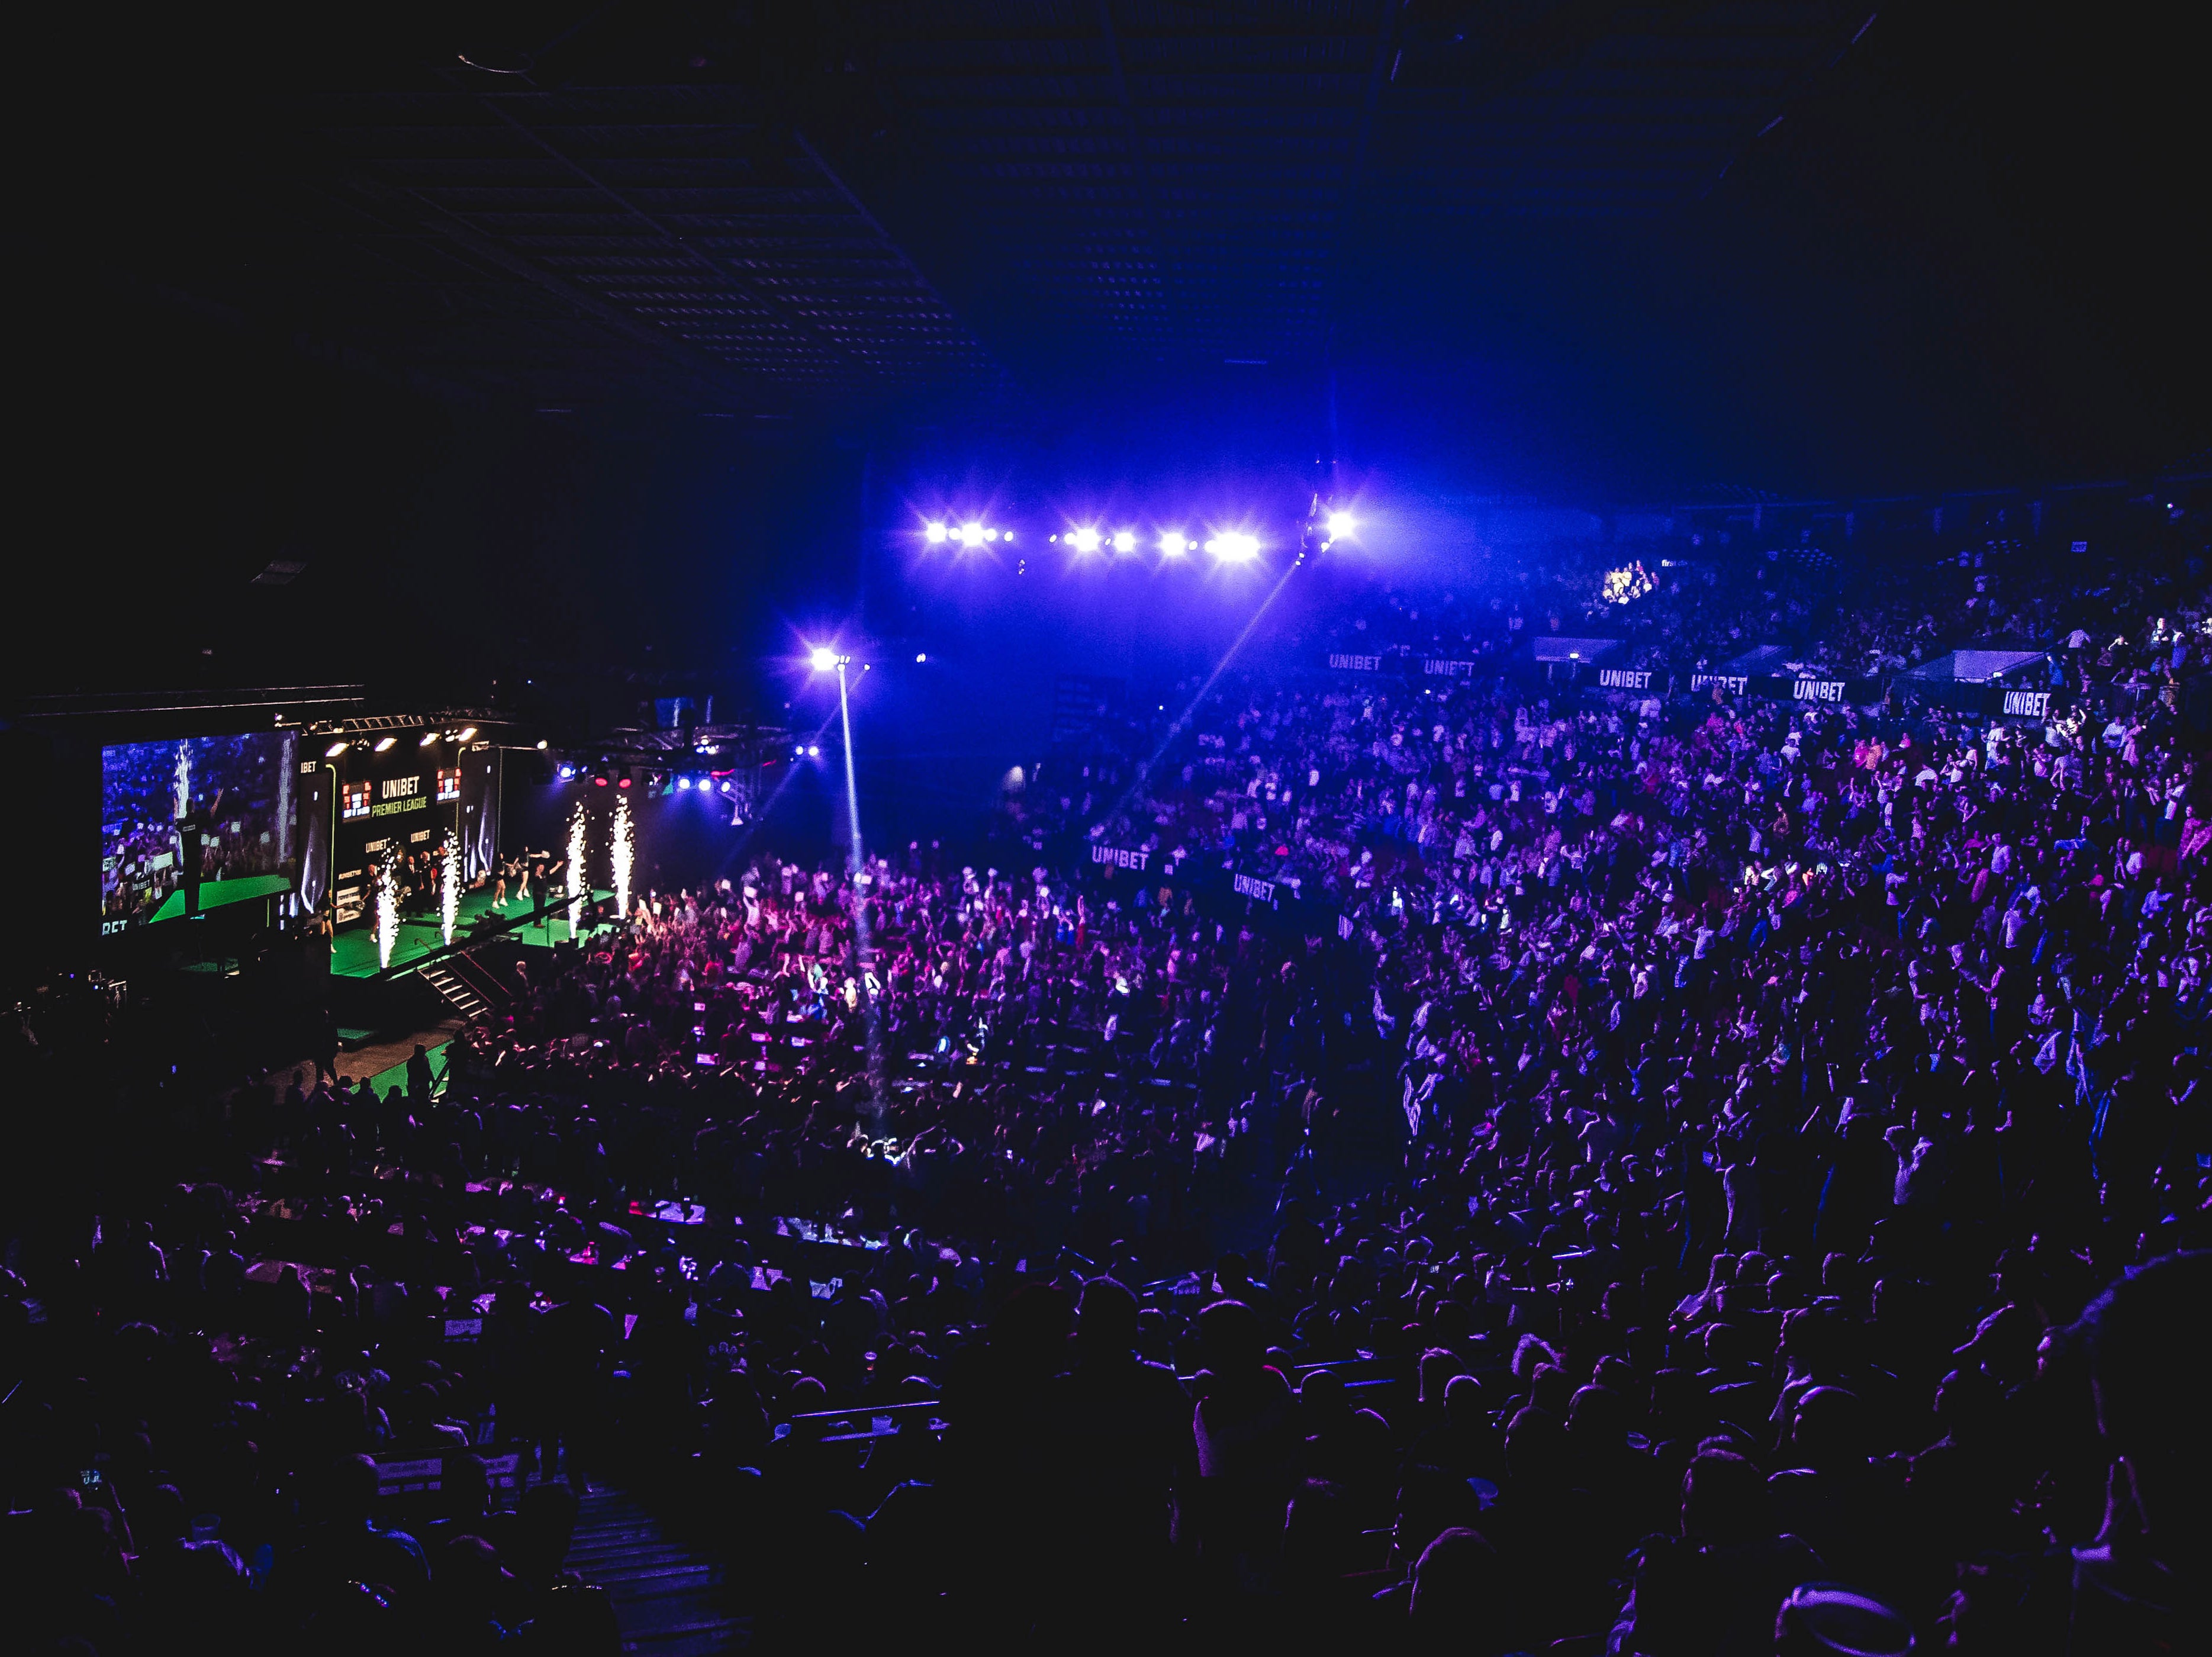 Leeds’s First Direct Arena, hosting the Unibet Premier League Darts on 16 May 2019